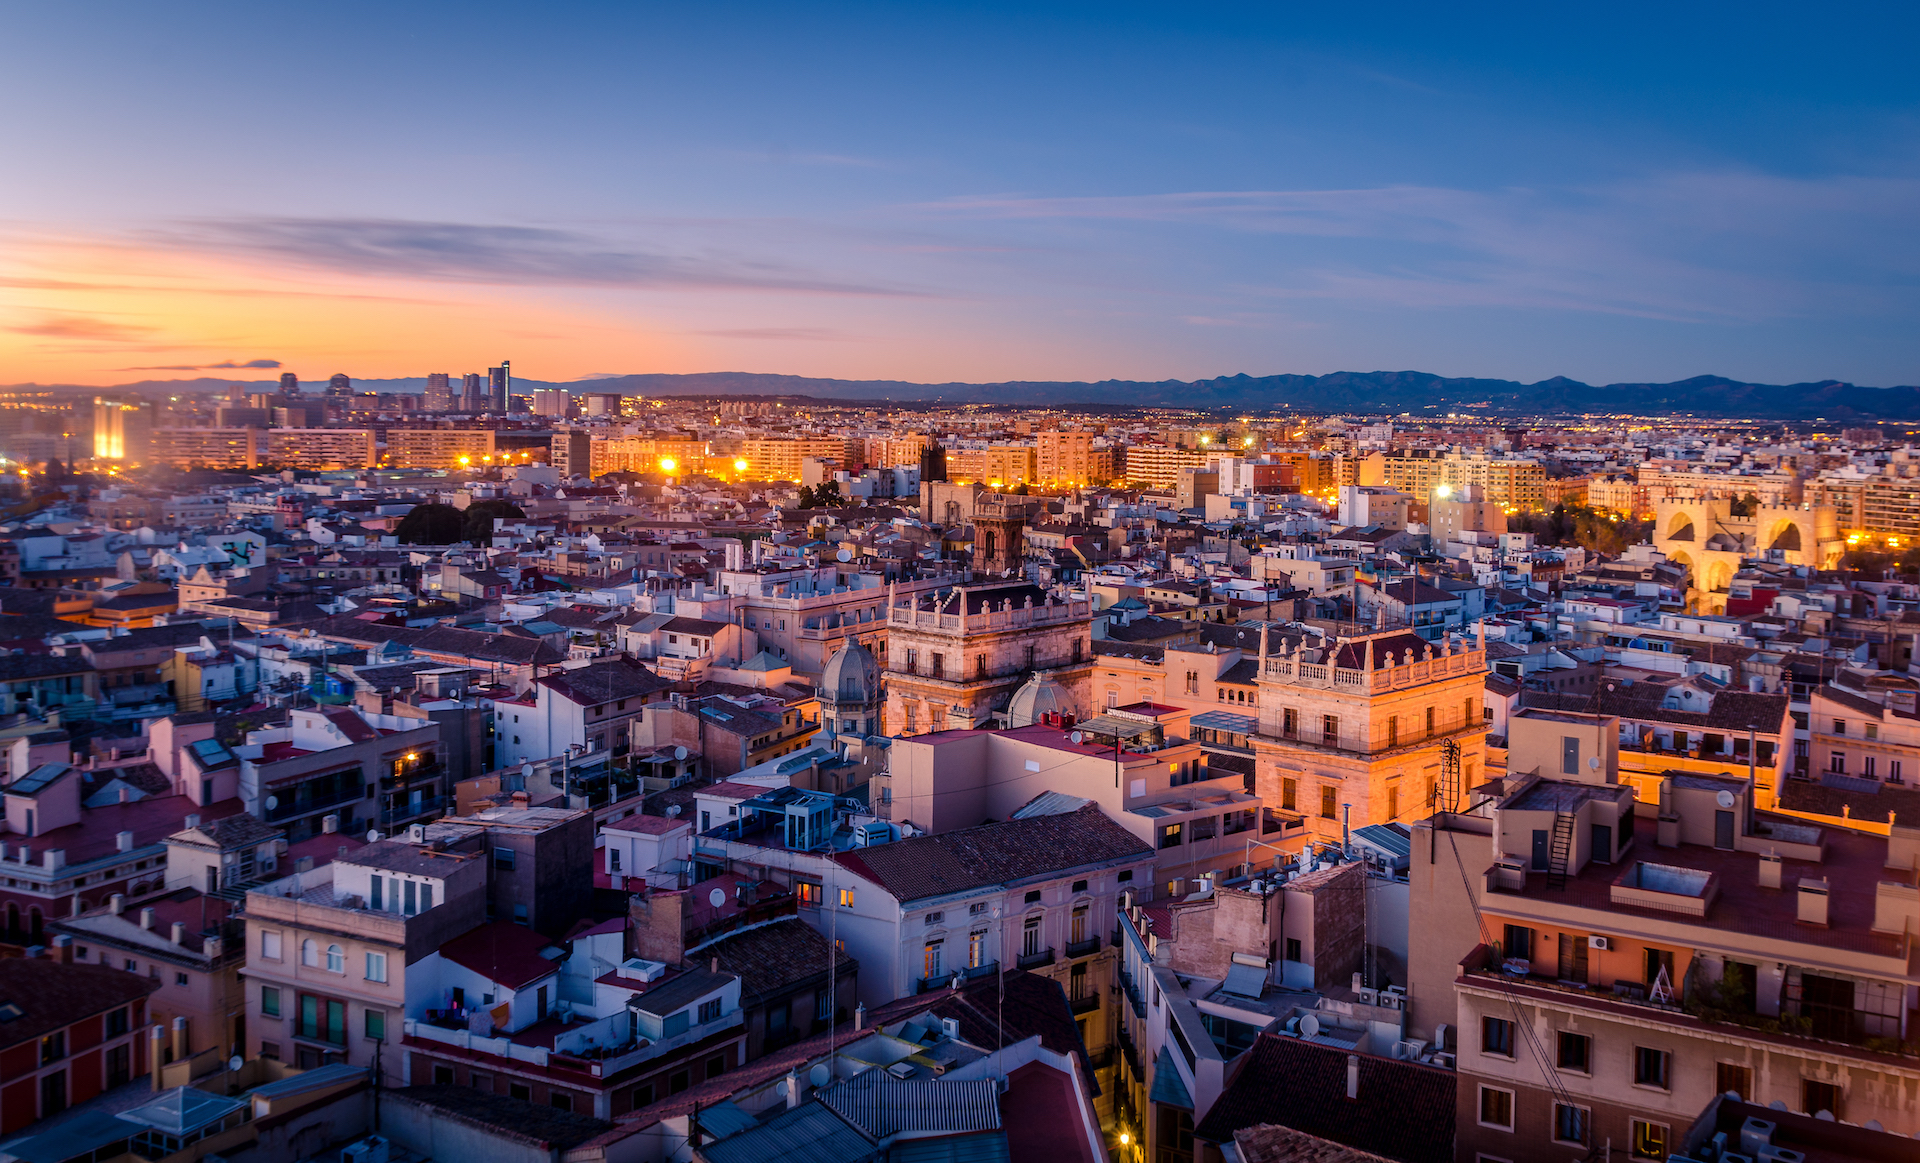 Valencia Interesting Facts About The Jewel Of The Mediterranean